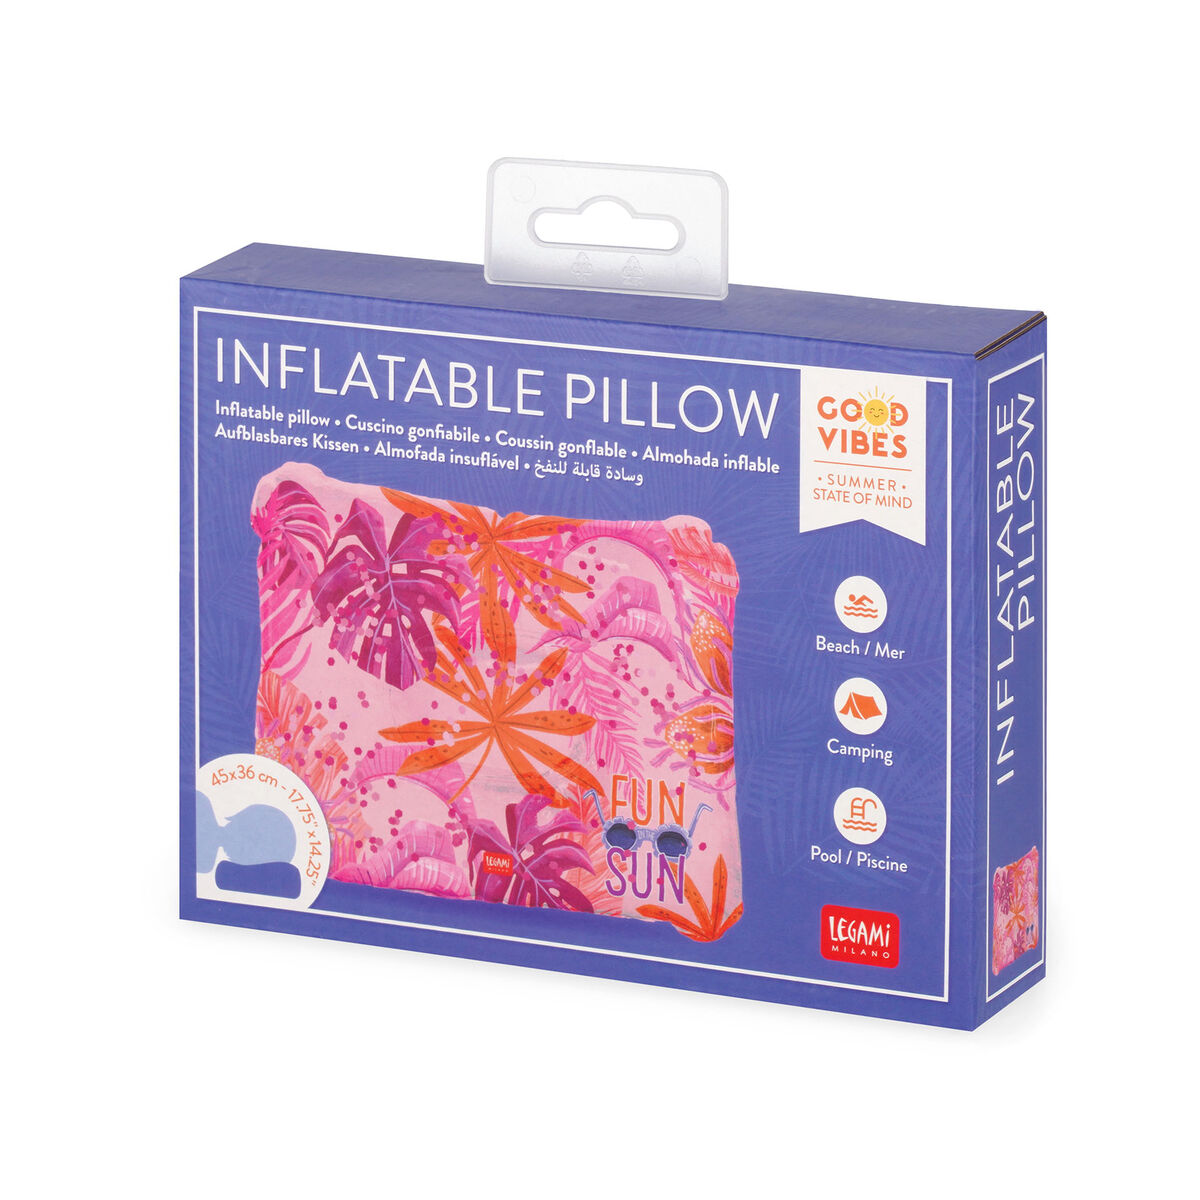 Inflatable Pillow - Good Vibes, , zoo